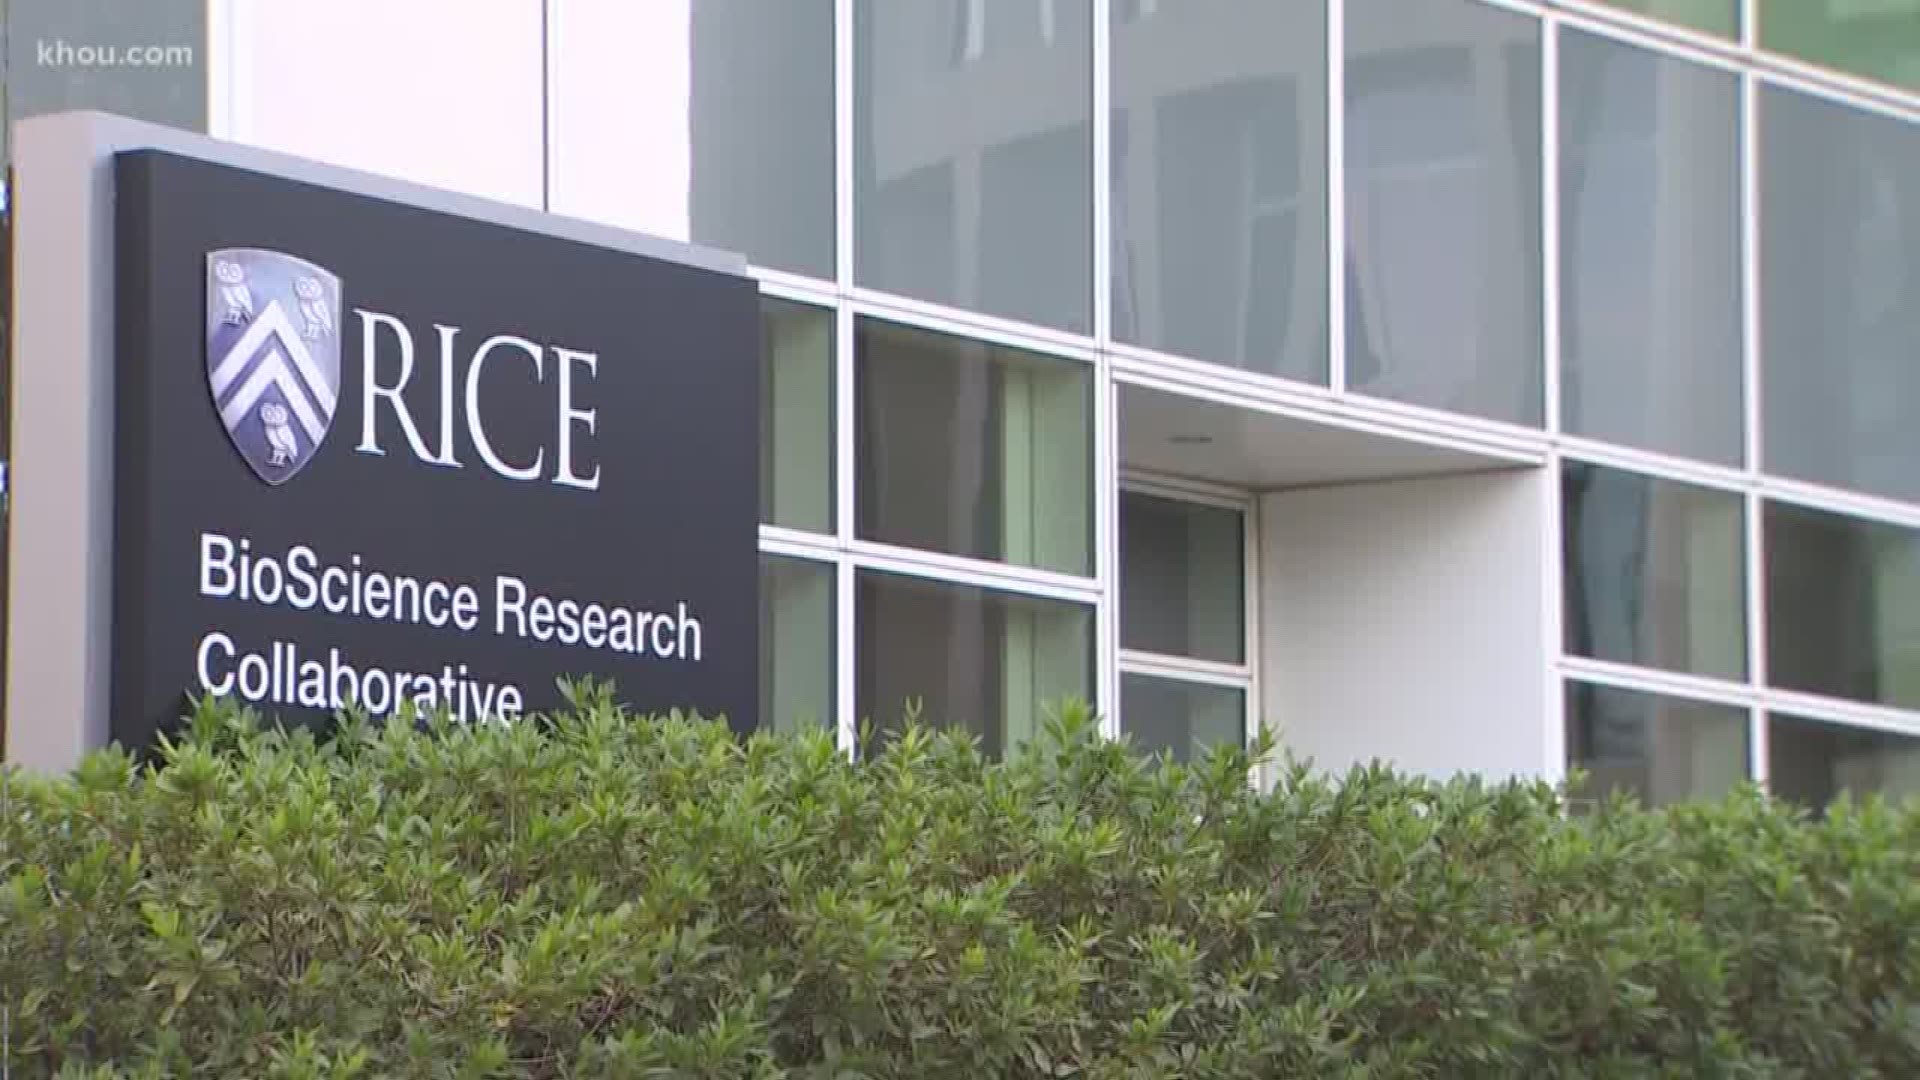 Rice researcher Michael Deem is being investigated for his role in genetically-edited babies. The university says none of the work happened in the U.S. but it does not condone.